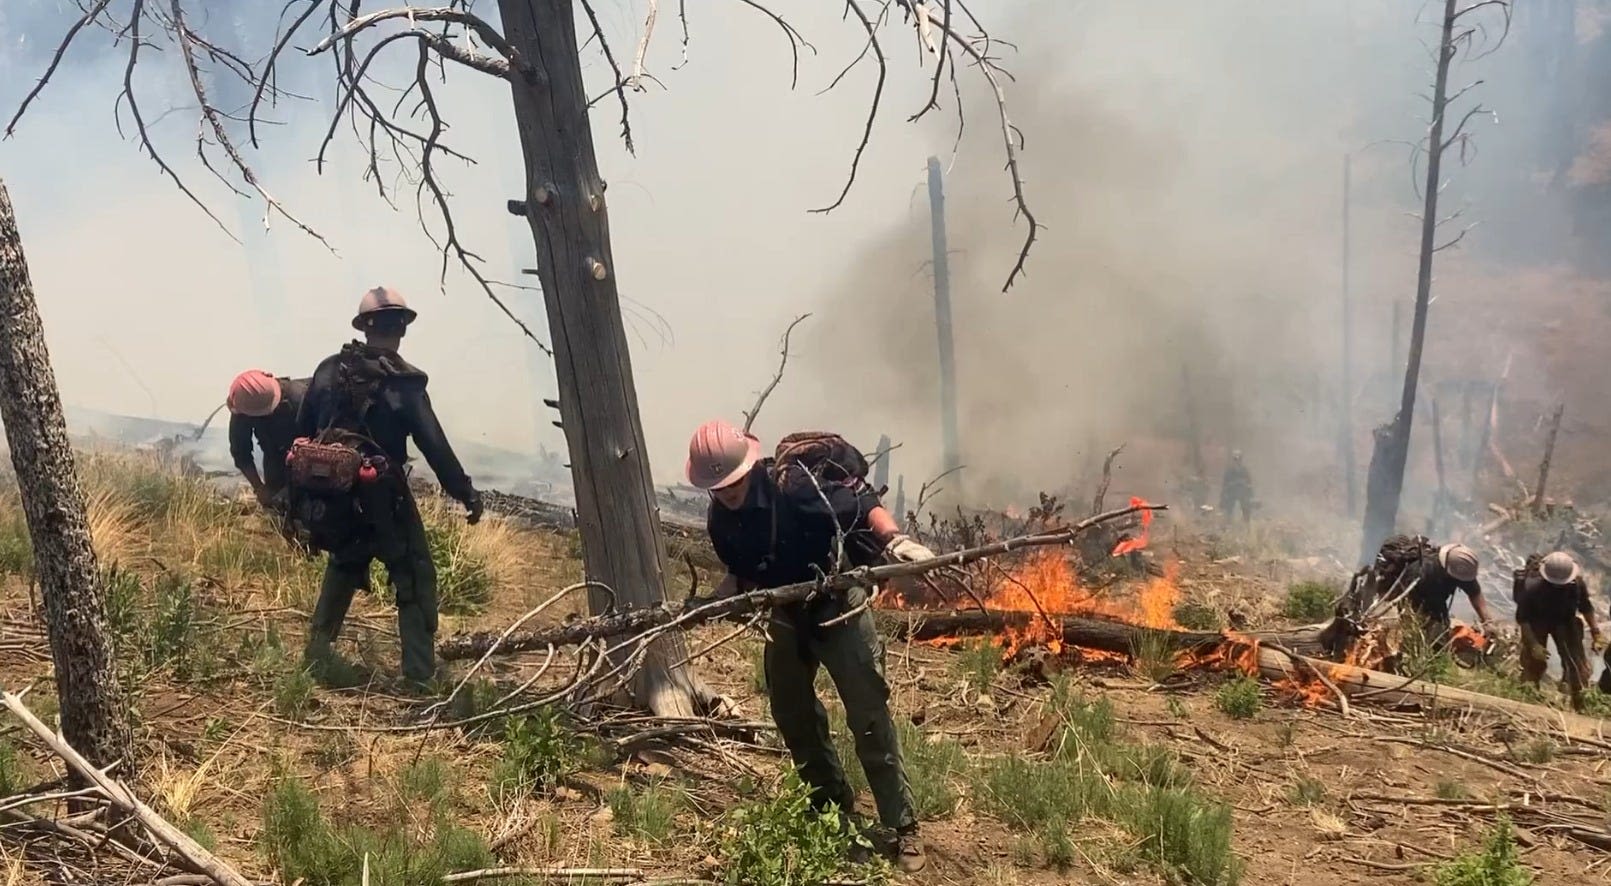 Blue 2 wildfire now burning through 7,000 acres of land in Lincoln National Forest